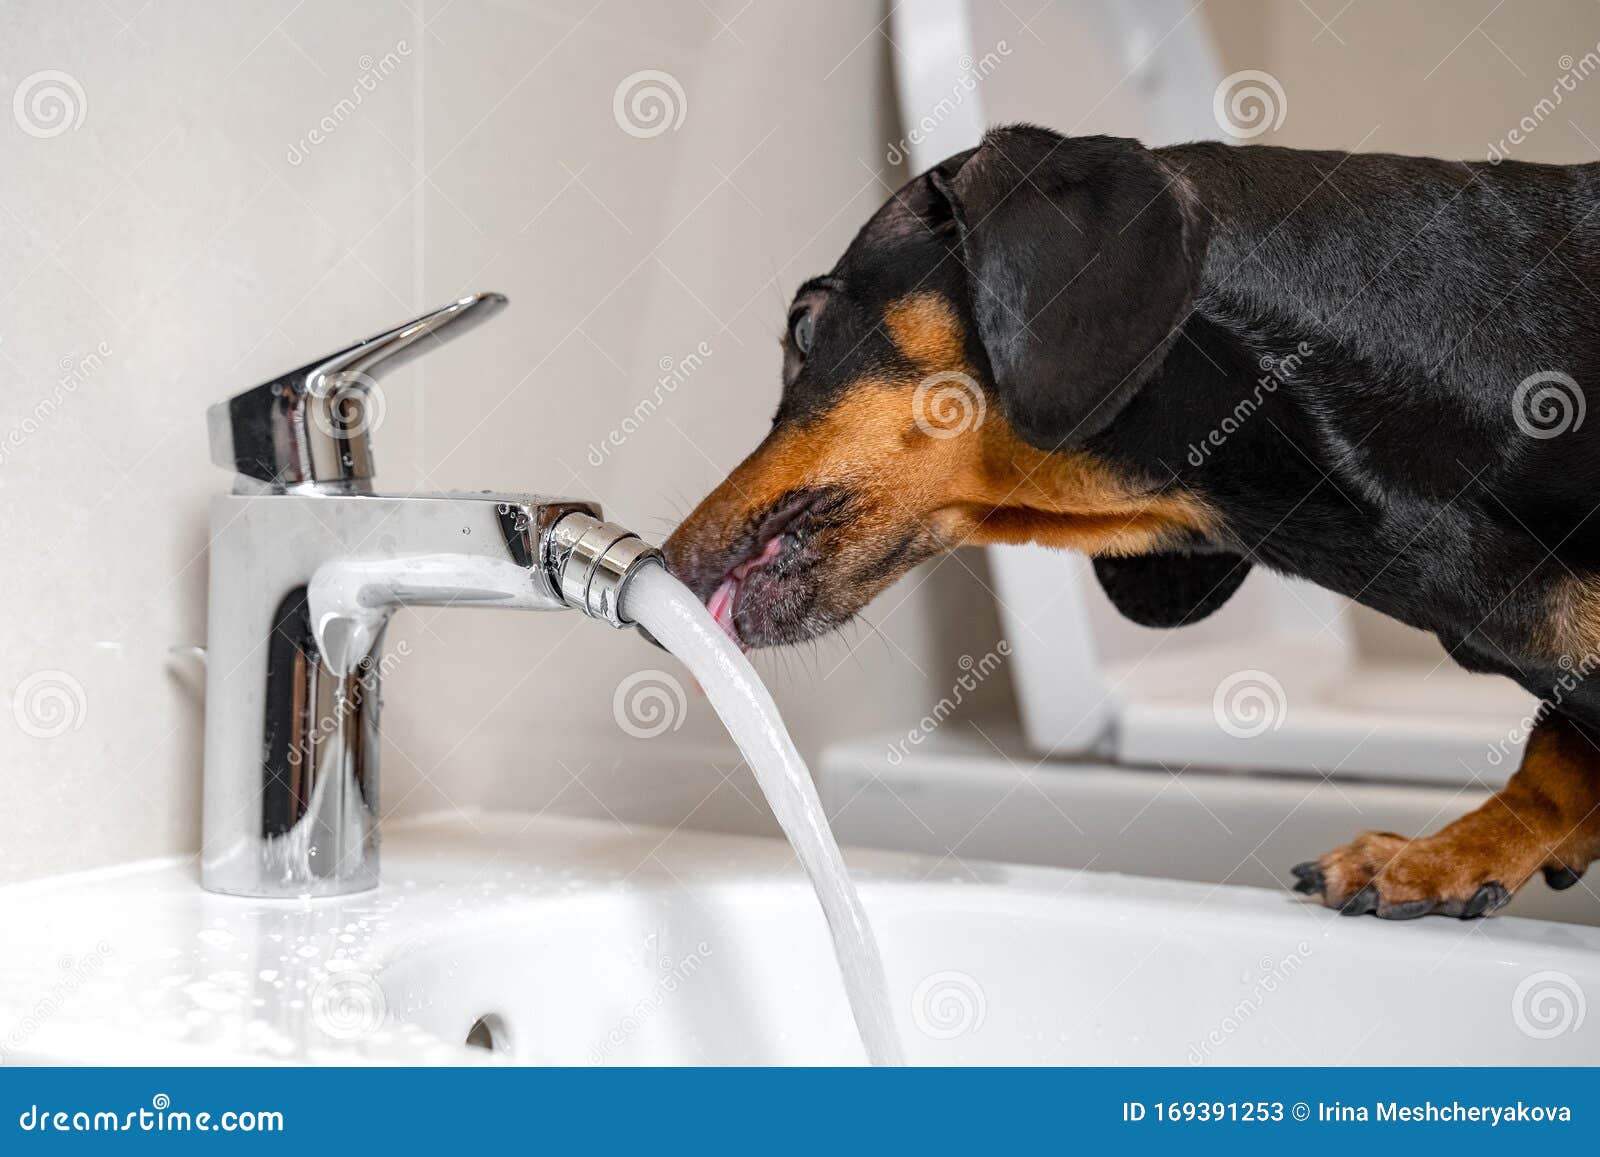 Black And Tan Dachshund Drinking Water From Steel Faucet Of White